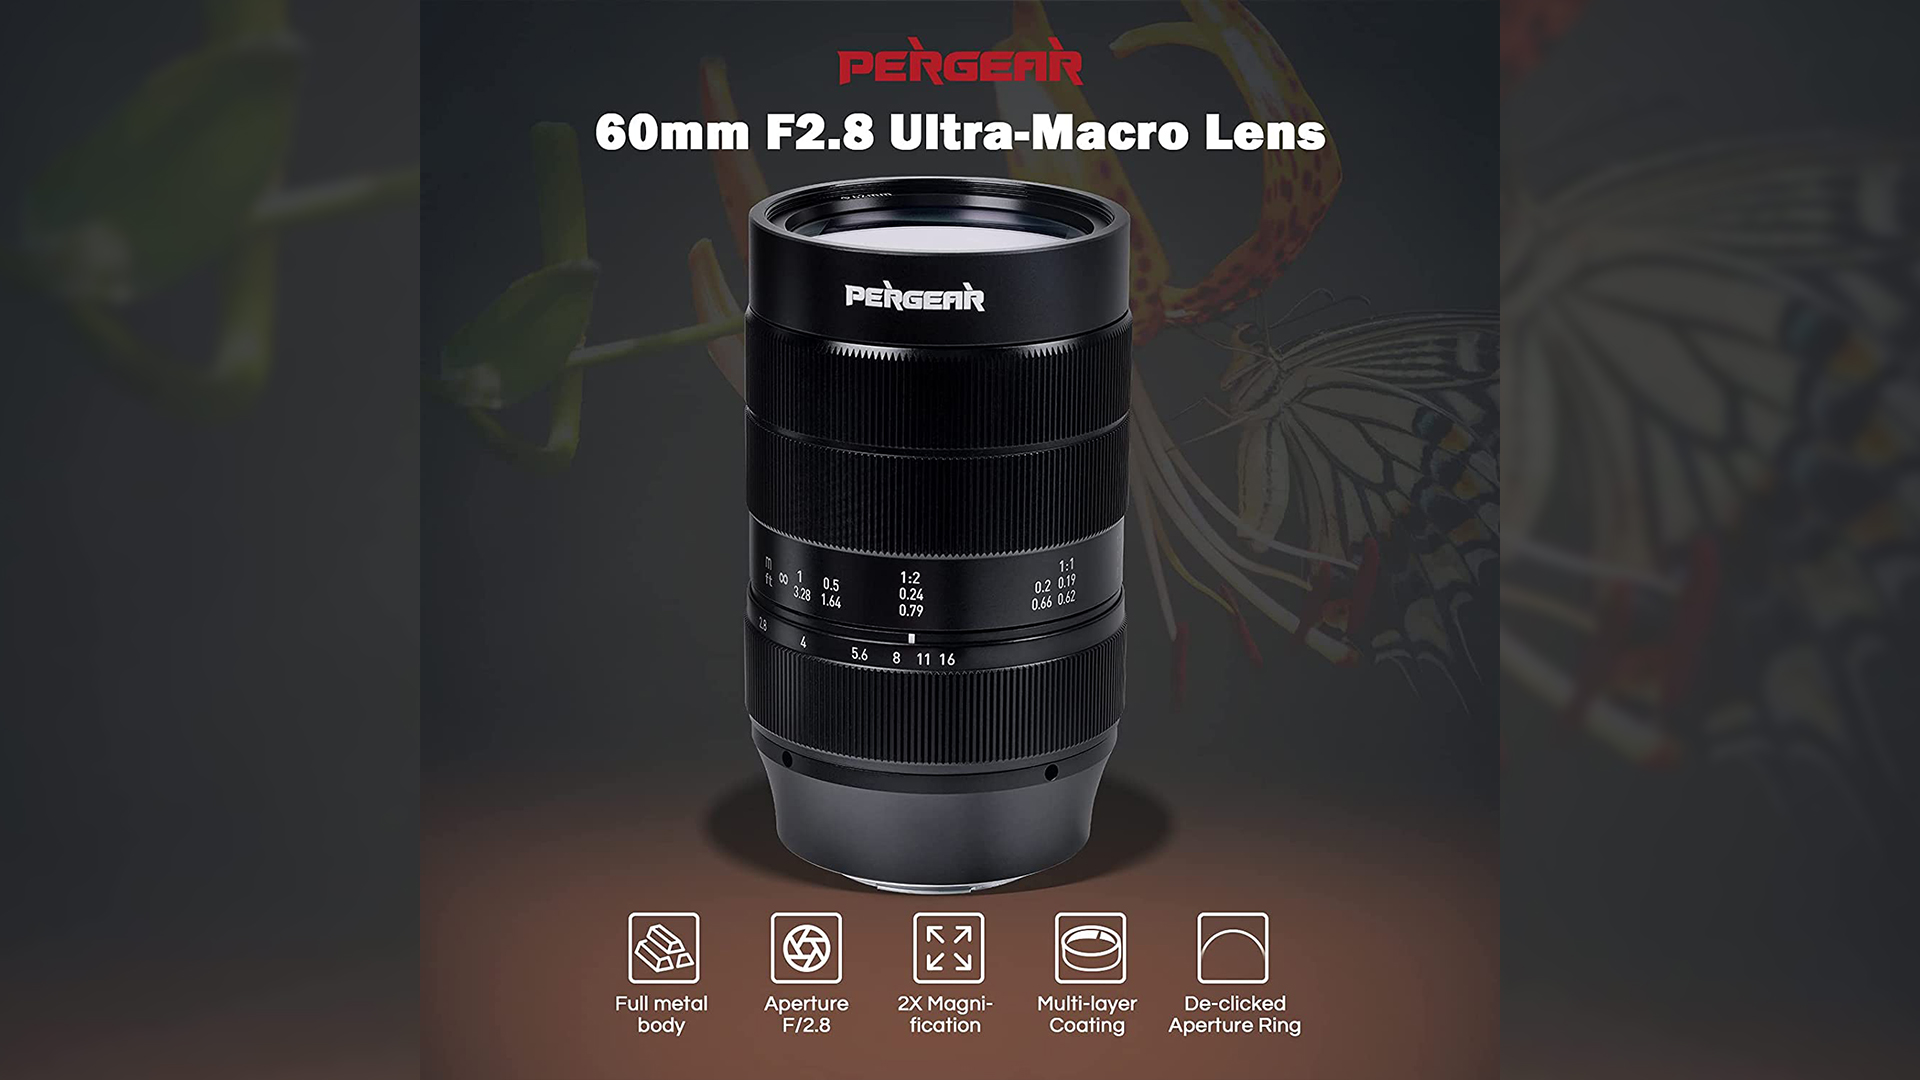 Pergearが60mm F/2.8 Ultra-Macro 2x Magnification Lensを発売 | CineD